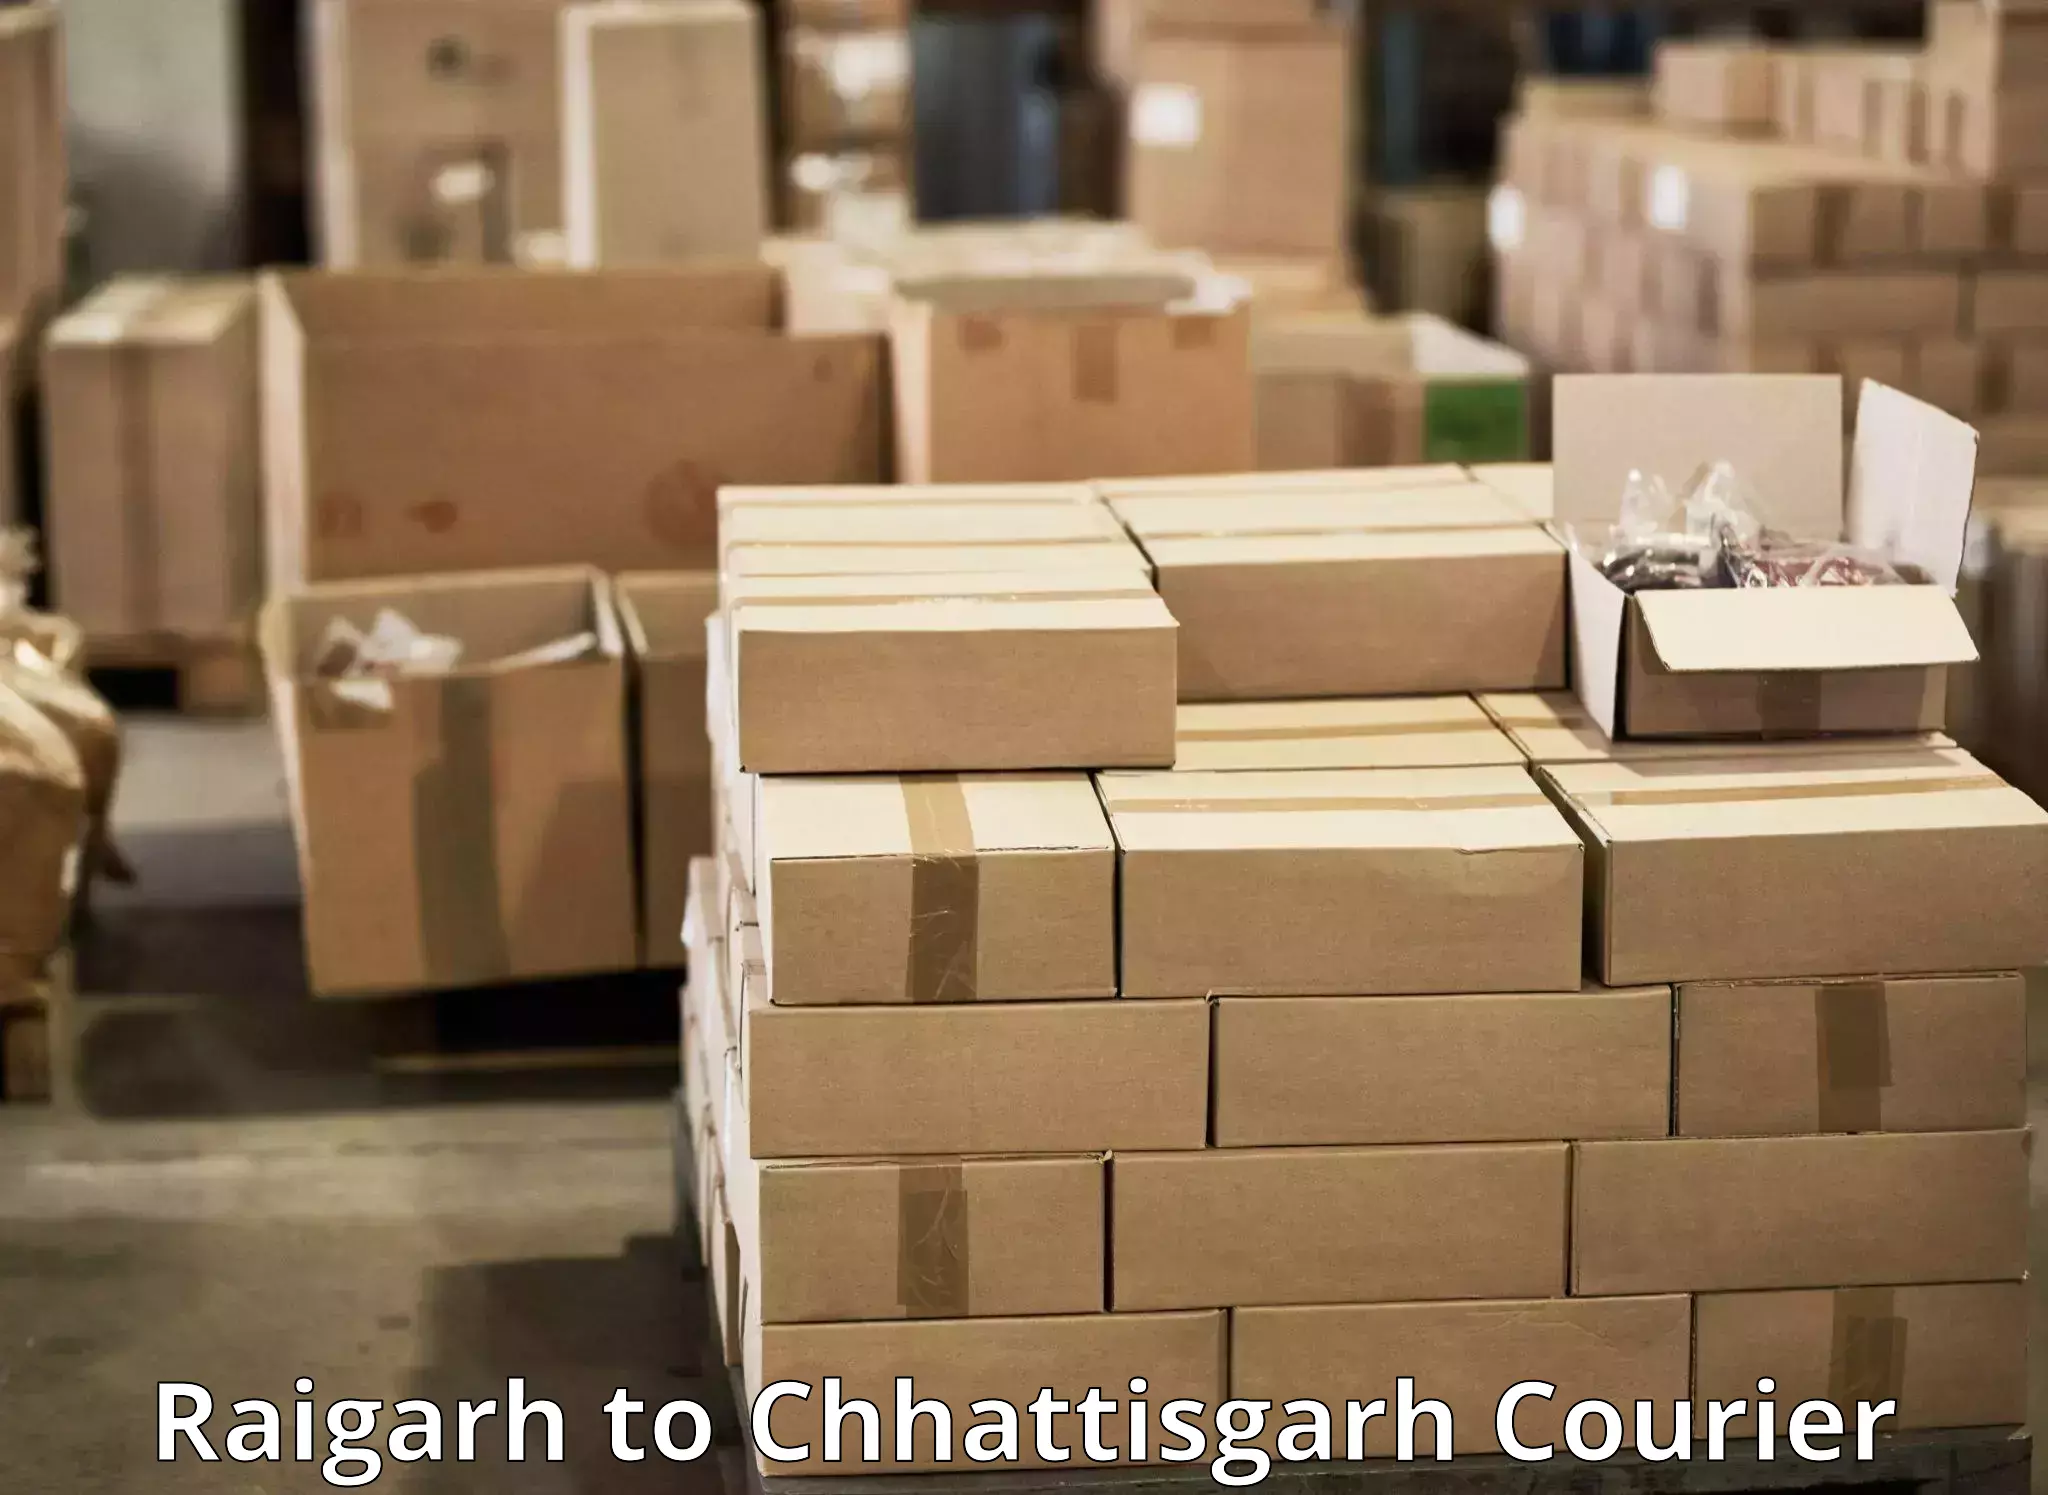 Courier service innovation Raigarh to Dhamtari